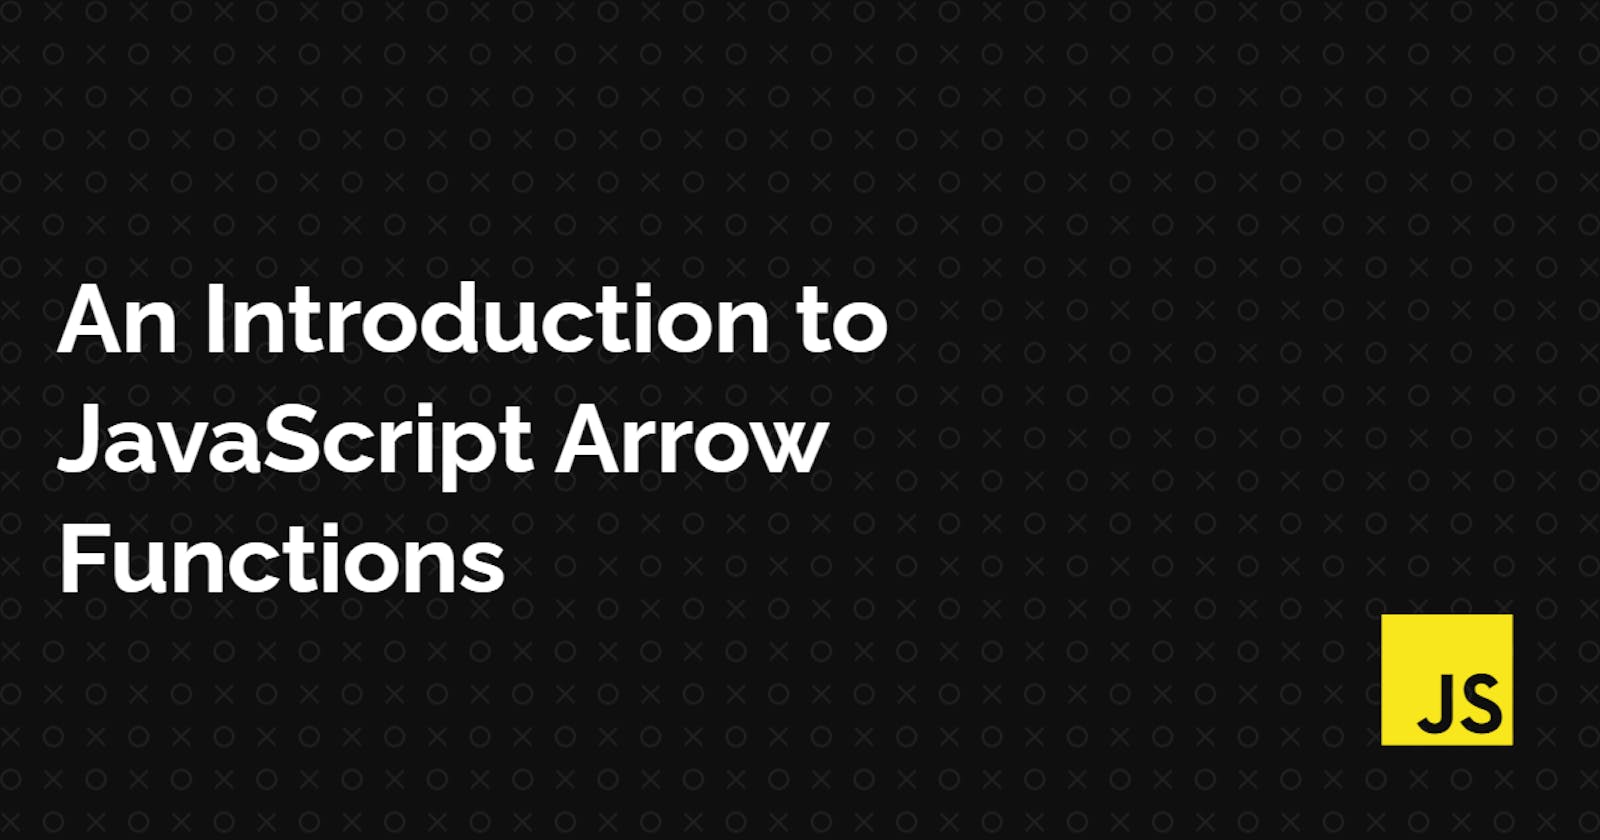 An Introduction to JavaScript Arrow Functions